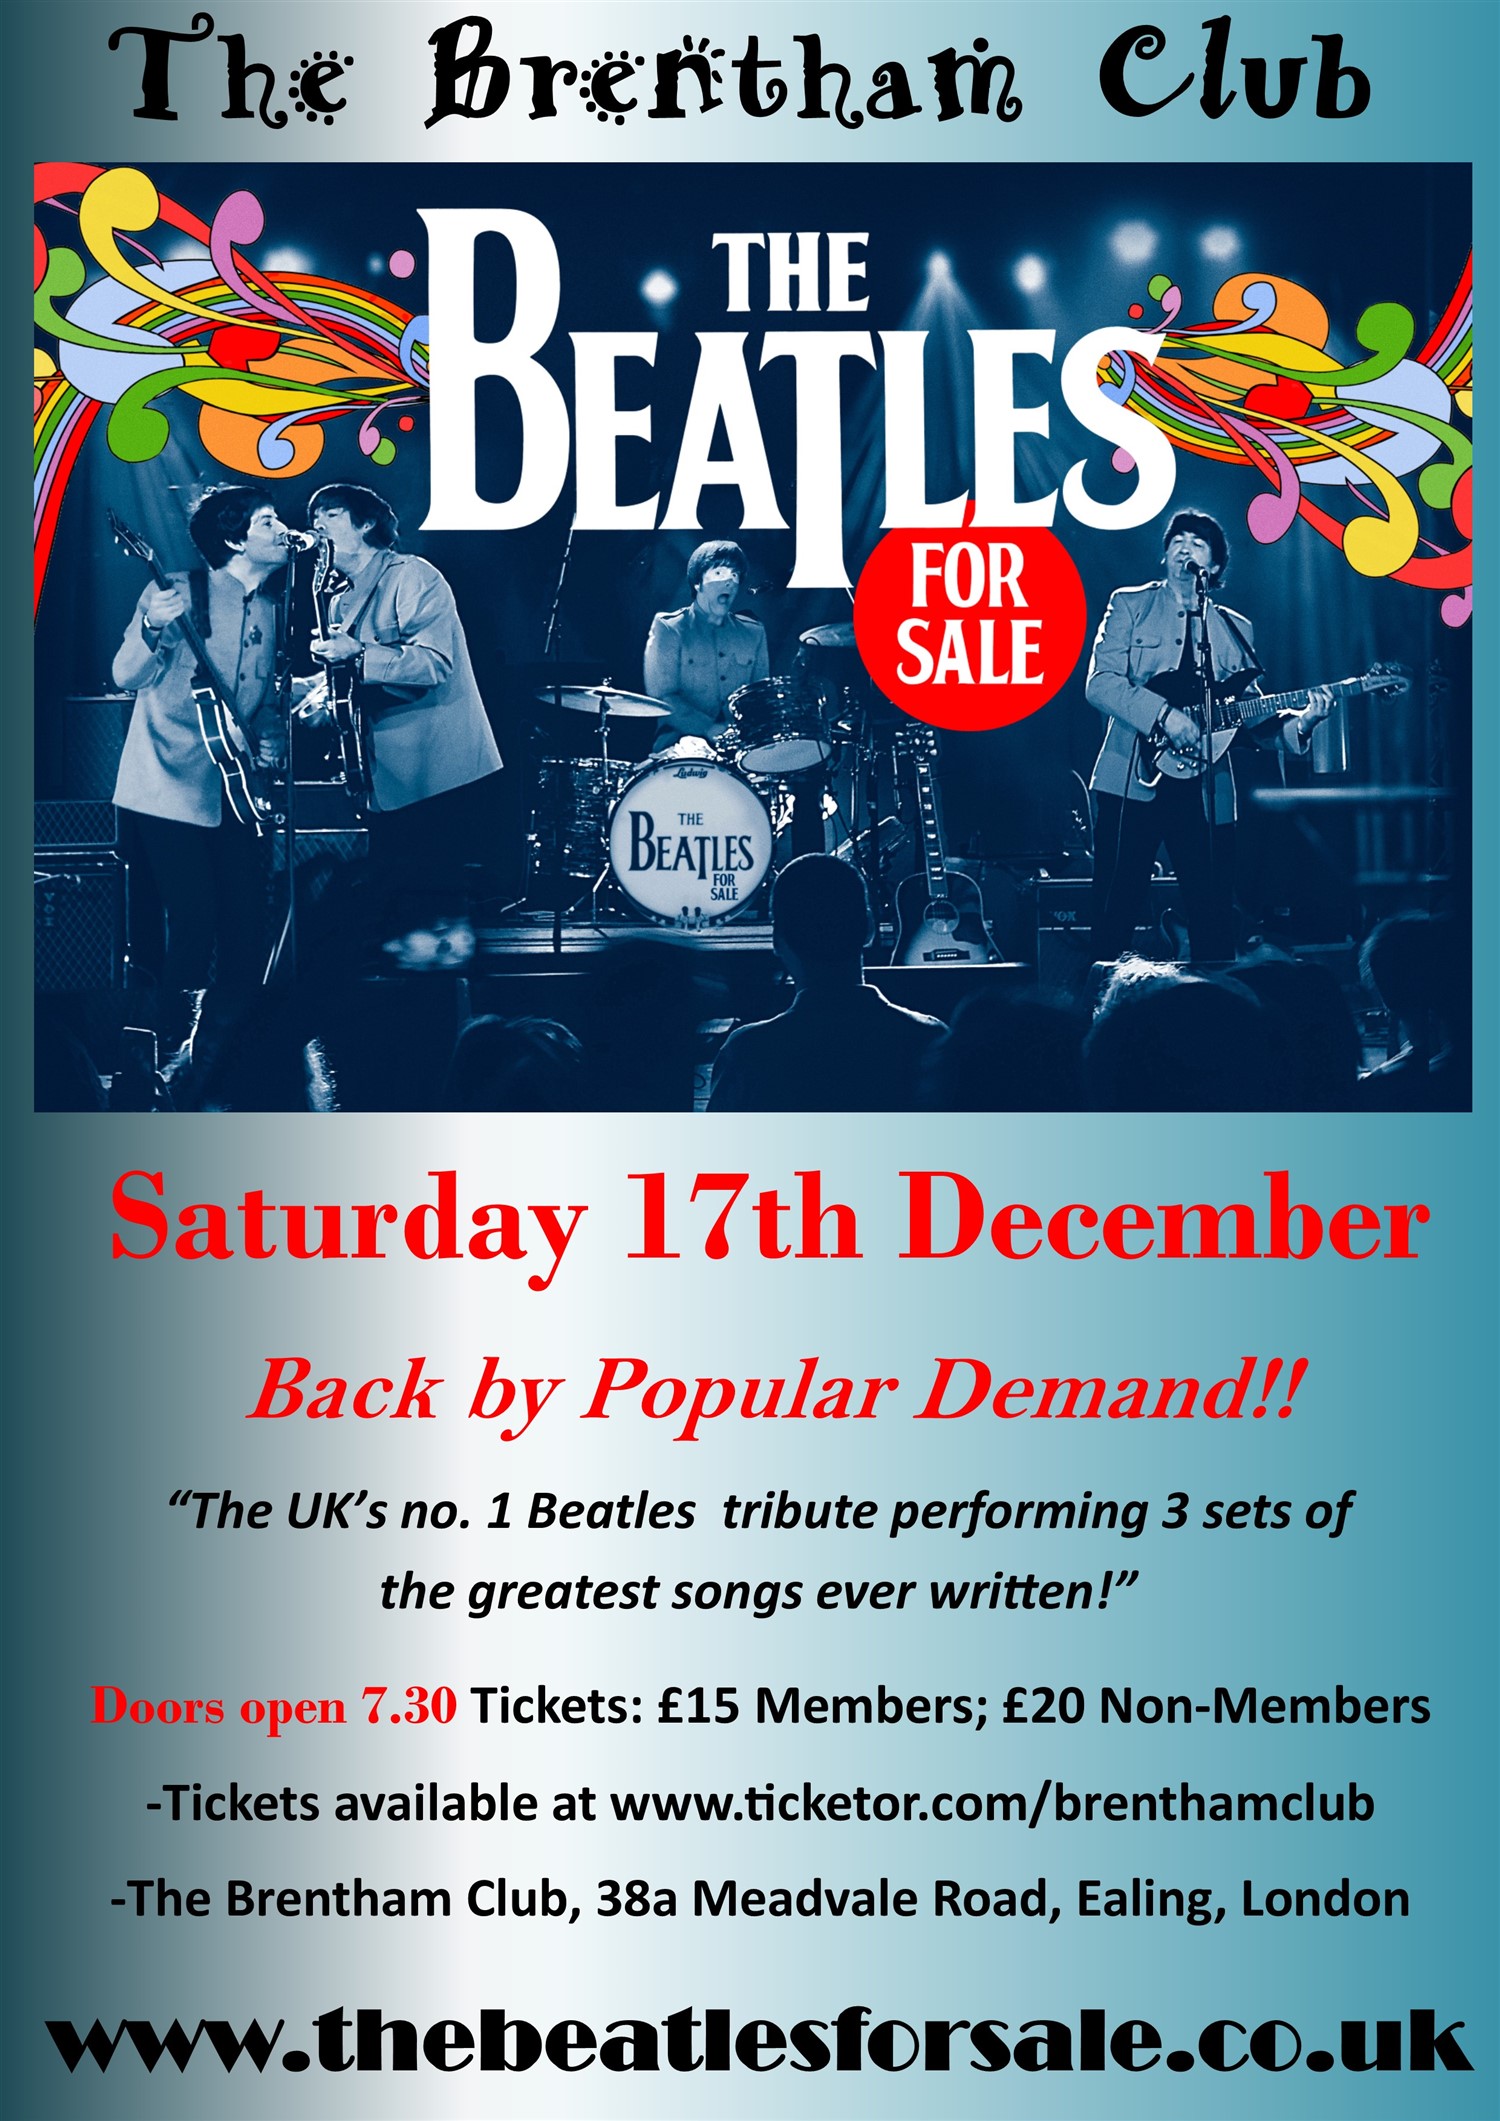 The Beatles for sale  on dic. 17, 19:30@The Brentham Club - Buy tickets and Get information on Brenthamclub.co.uk 